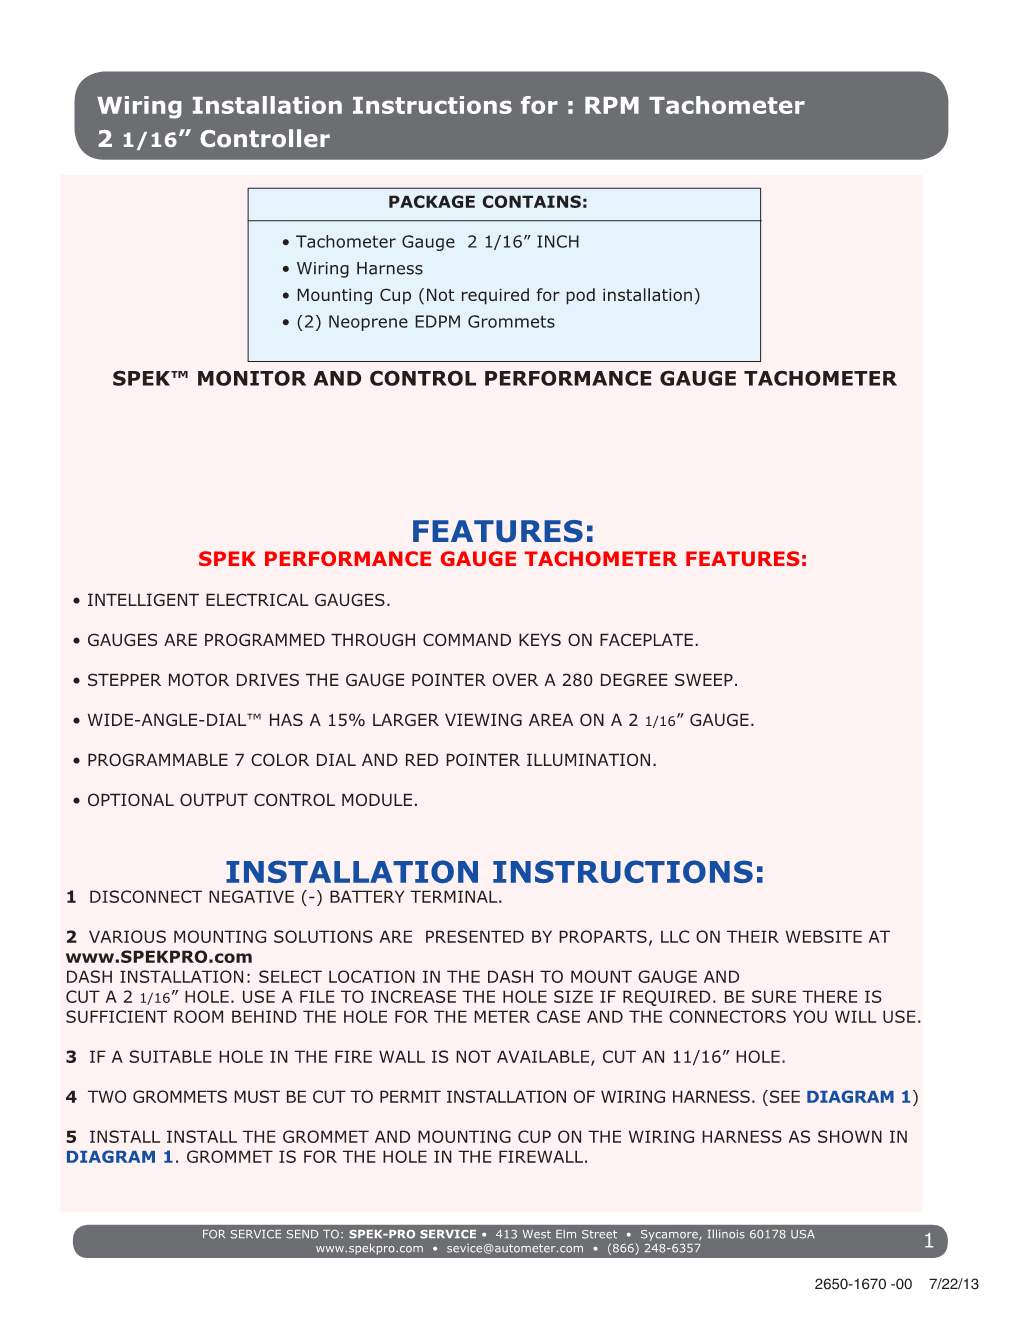 Wiring Installation Instructions for : RPM Tachometer 2 1/16” Controller